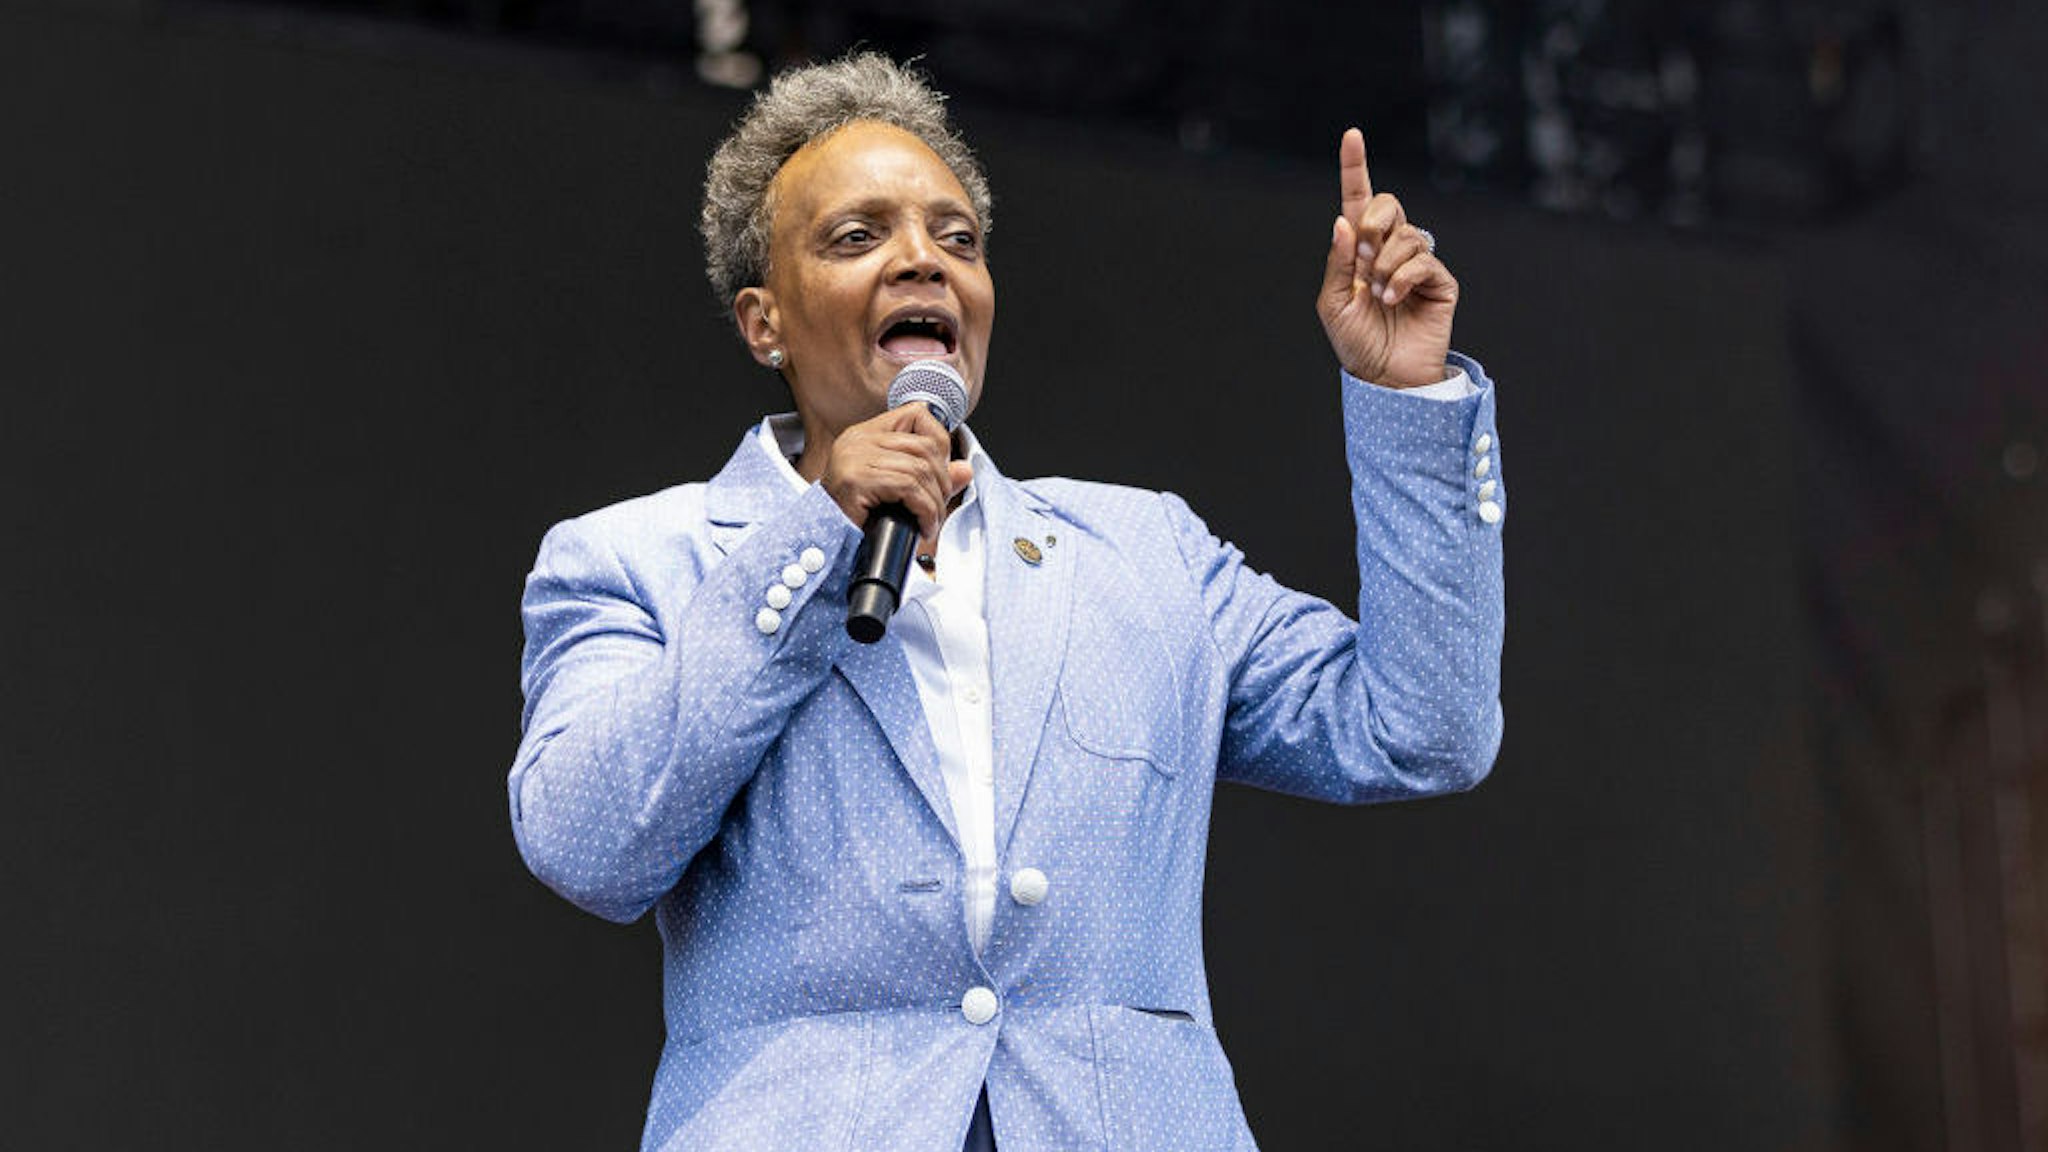 CHICAGO, ILLINOIS - JULY 28: Chicago Mayor, Lori Lightfoot speaks to crowd on day 1 of Lollapalooza at Grant Park on July 28, 2022 in Chicago, Illinois. (Photo by Scott Legato/Getty Images)